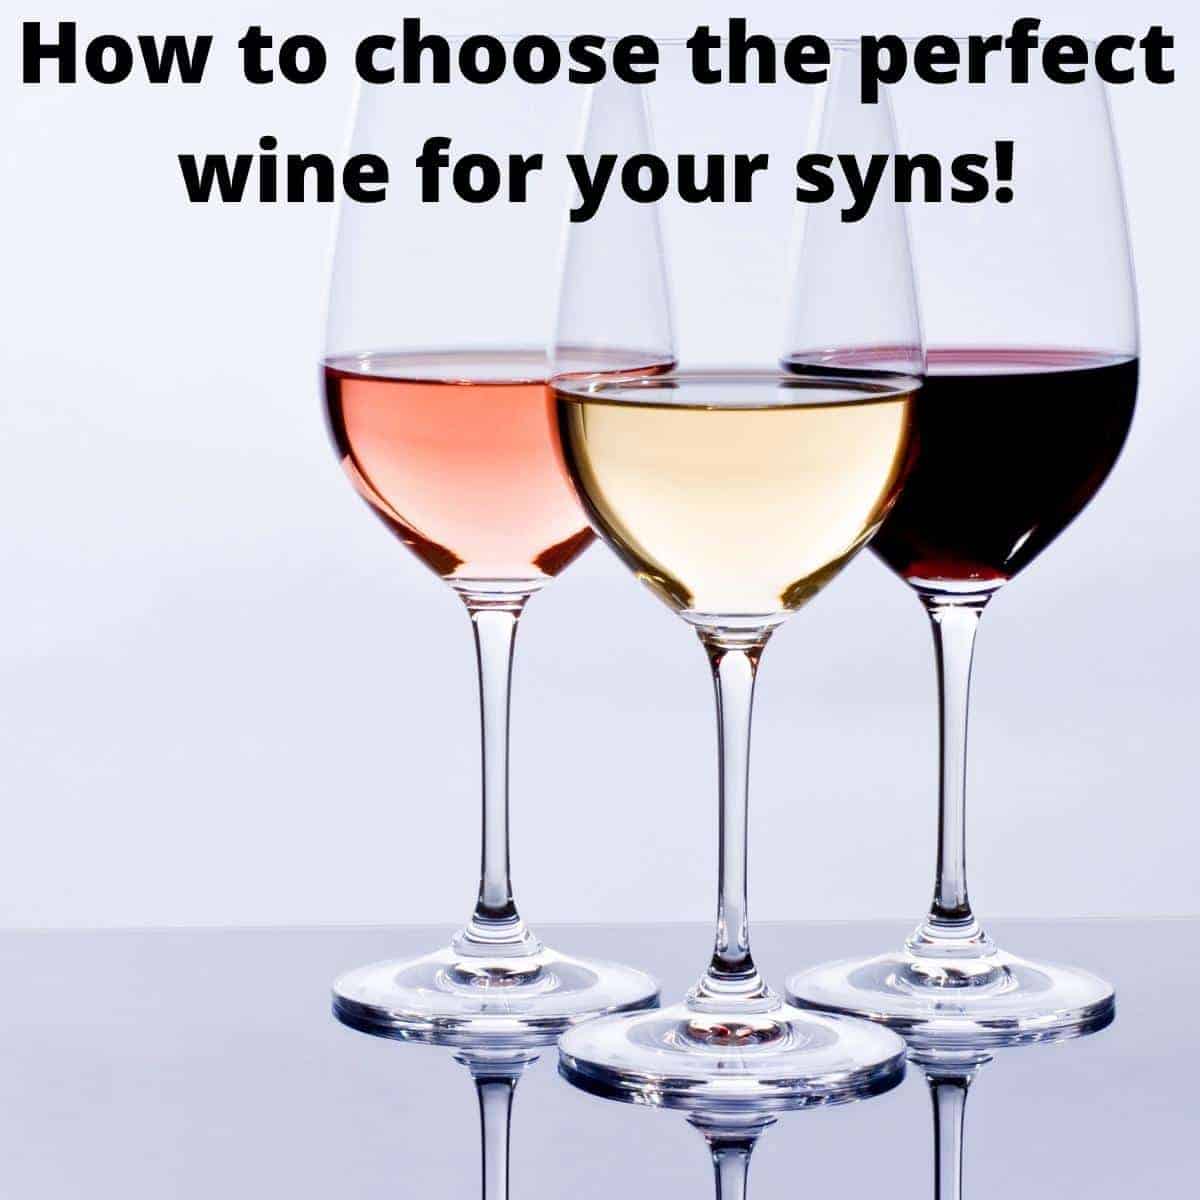 How to choose the perfect low syn wine!